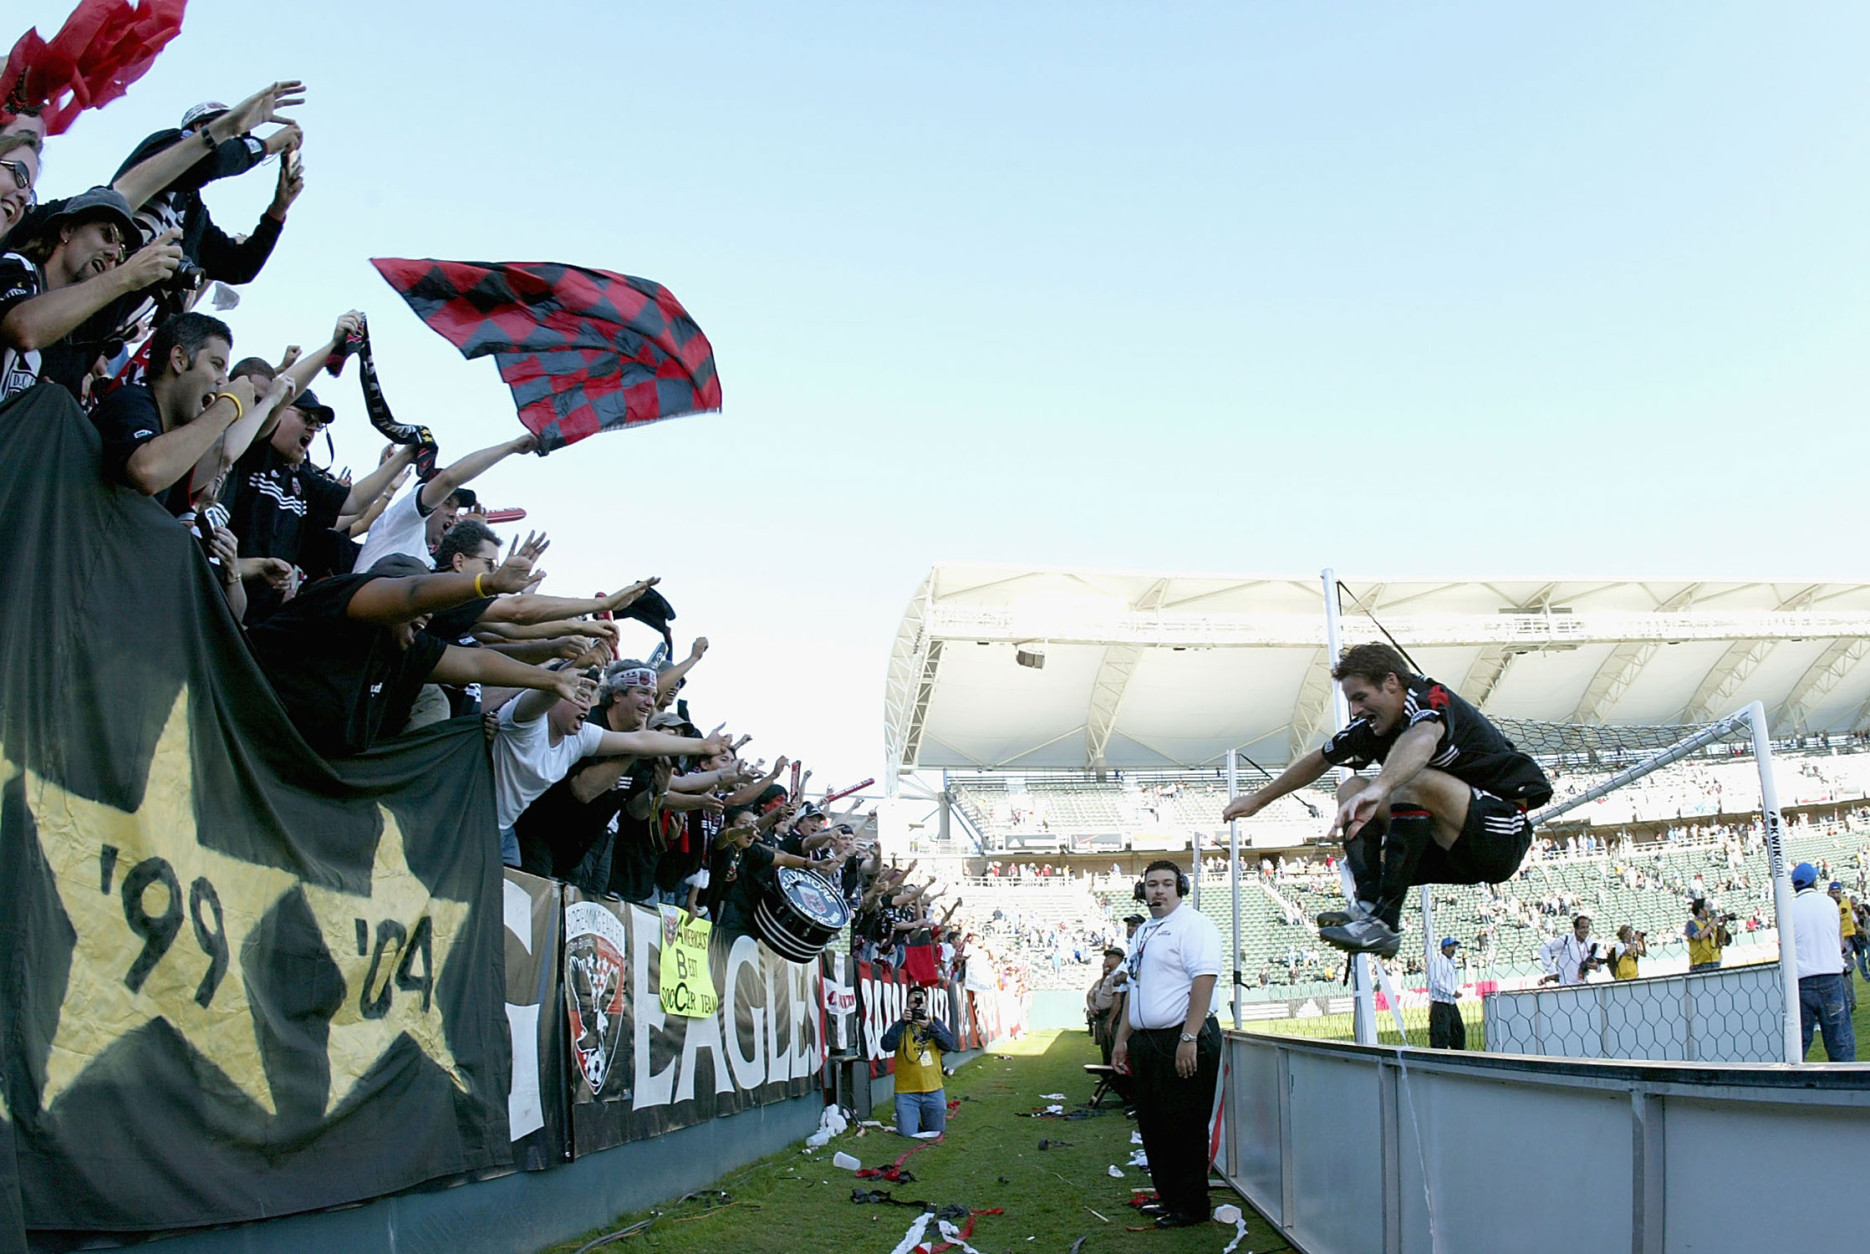 Ryan Nelsen #7 of the D.C. United runs towards the fans after after winning the MLS Cup 3-2 over the Kansas City Wizards on November 14, 2004 at the Home Depot Center in Carson, California. (Getty Images/Doug Benc)